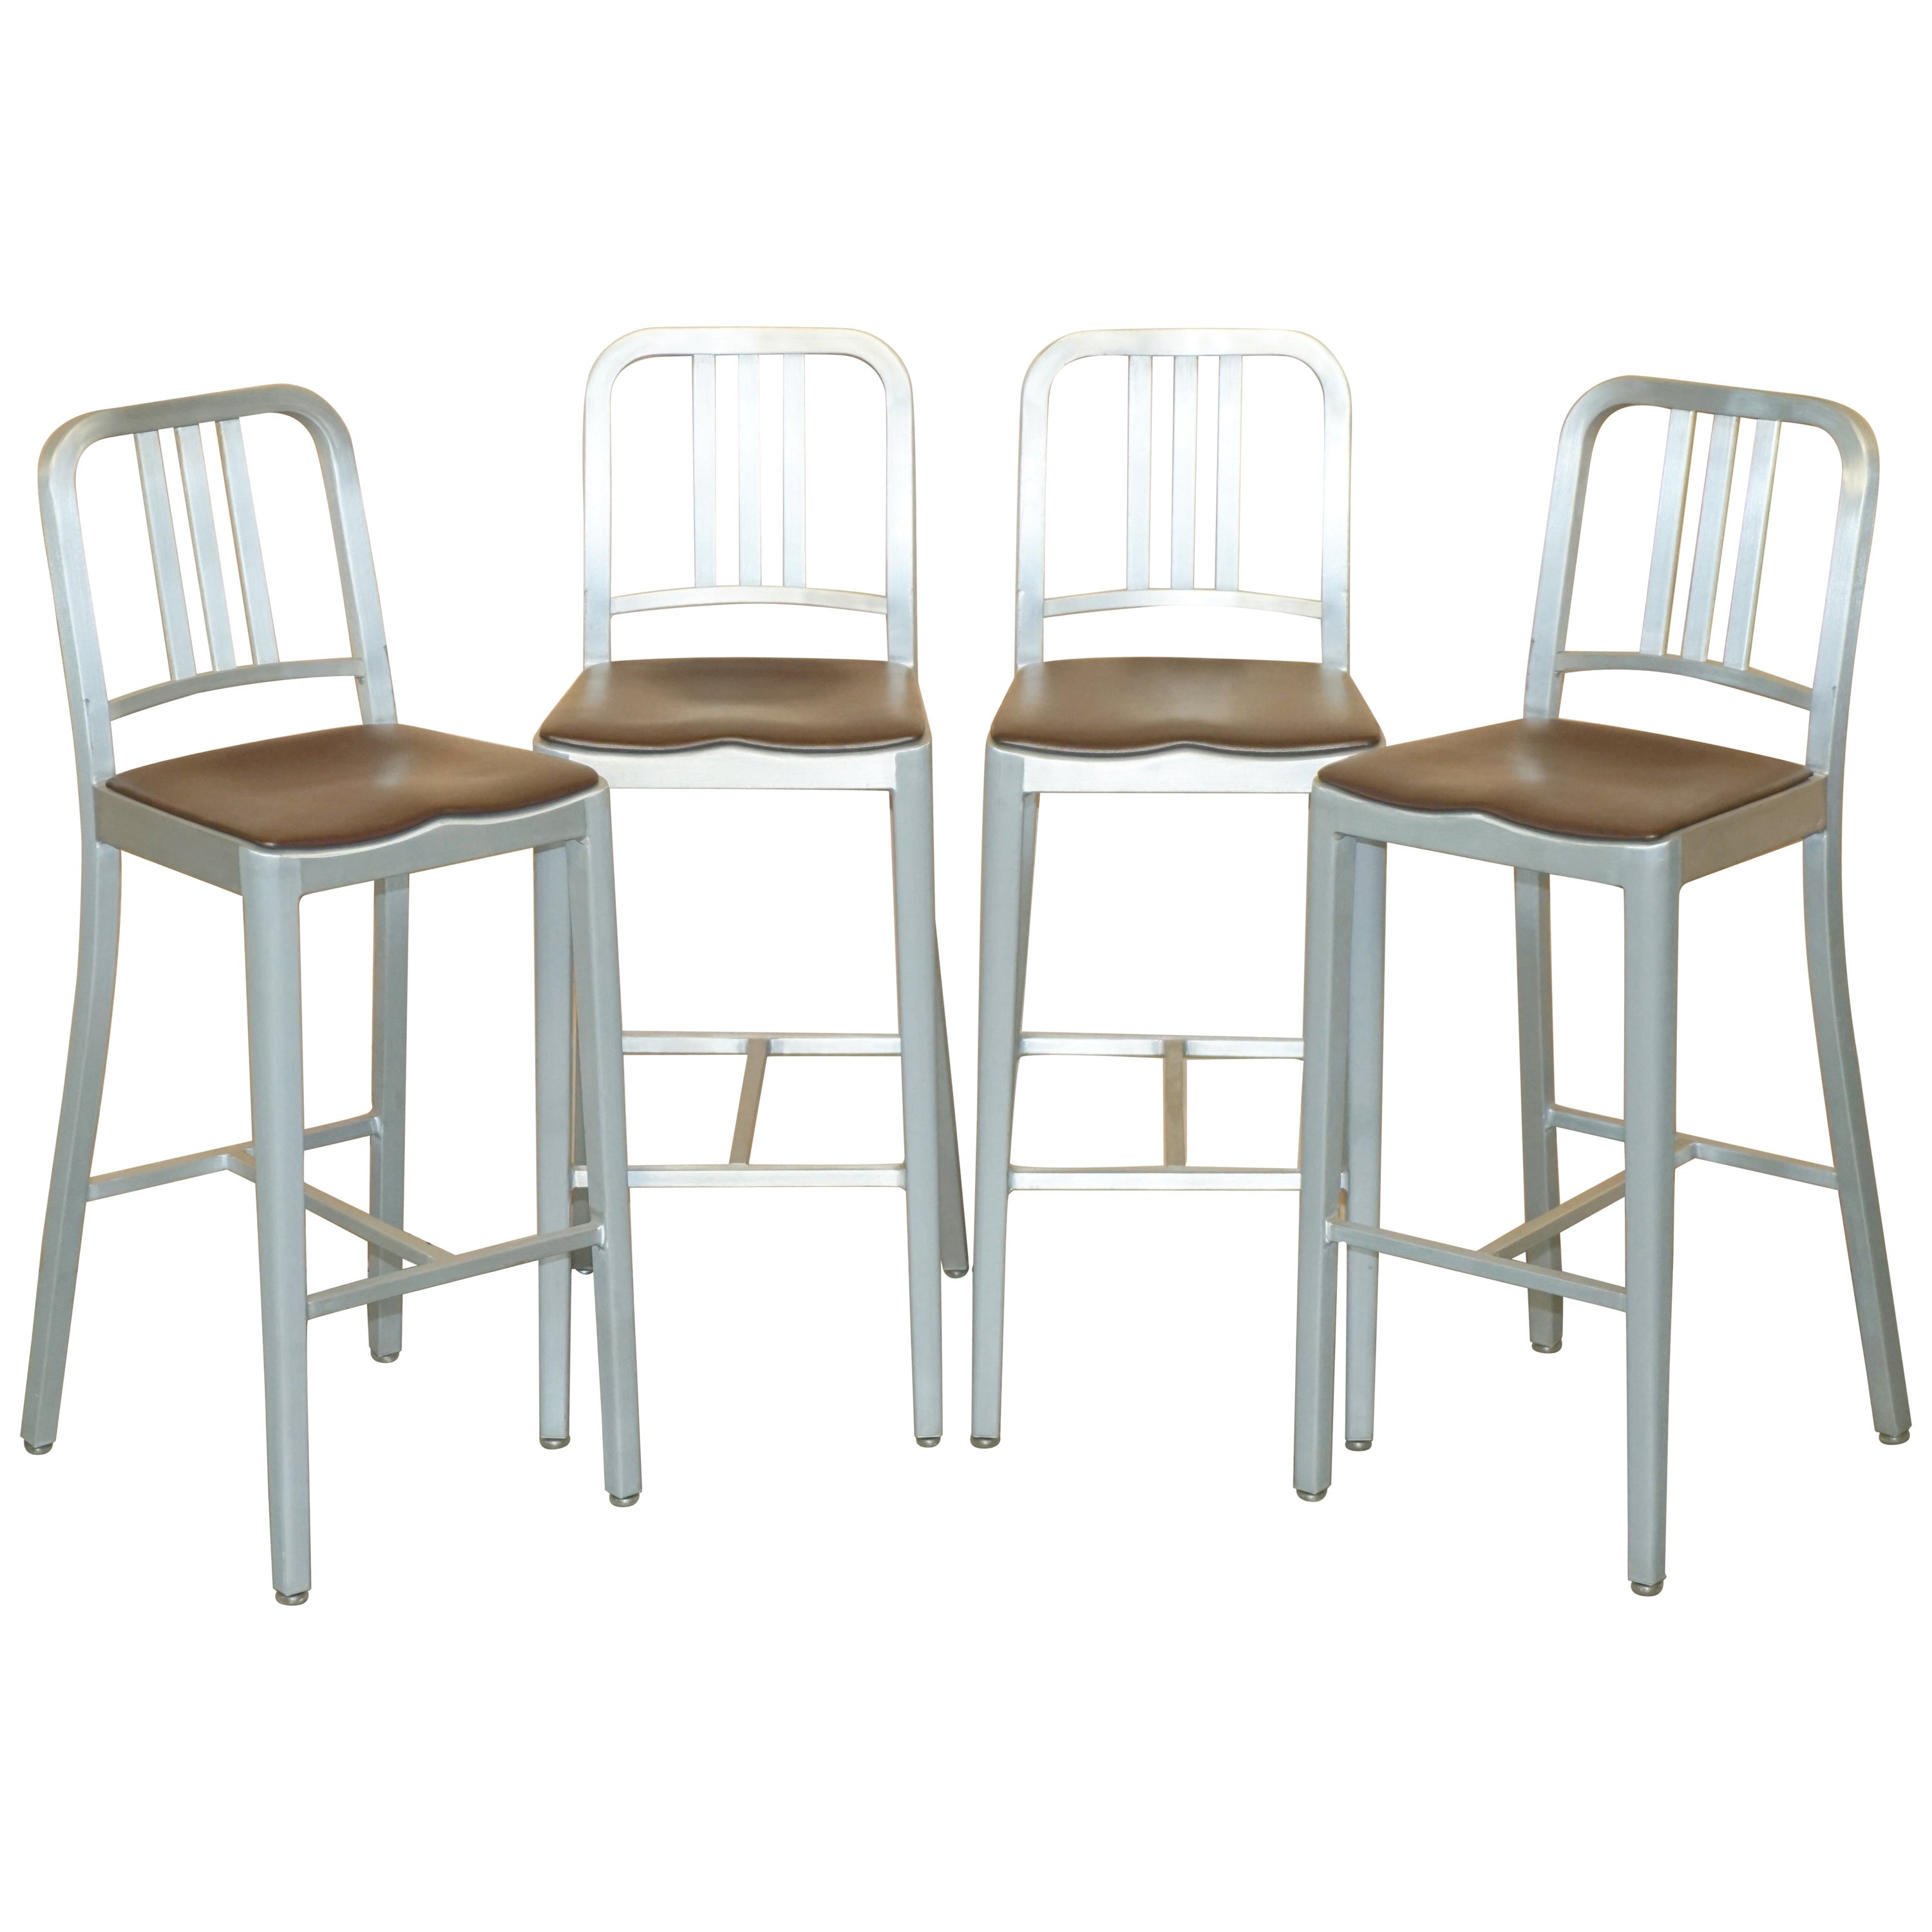 FOUR COLLECTABLE ViNTAGE EMECO 111 BRUSHED ALUMINIUM COUNTER BAR STOOLS